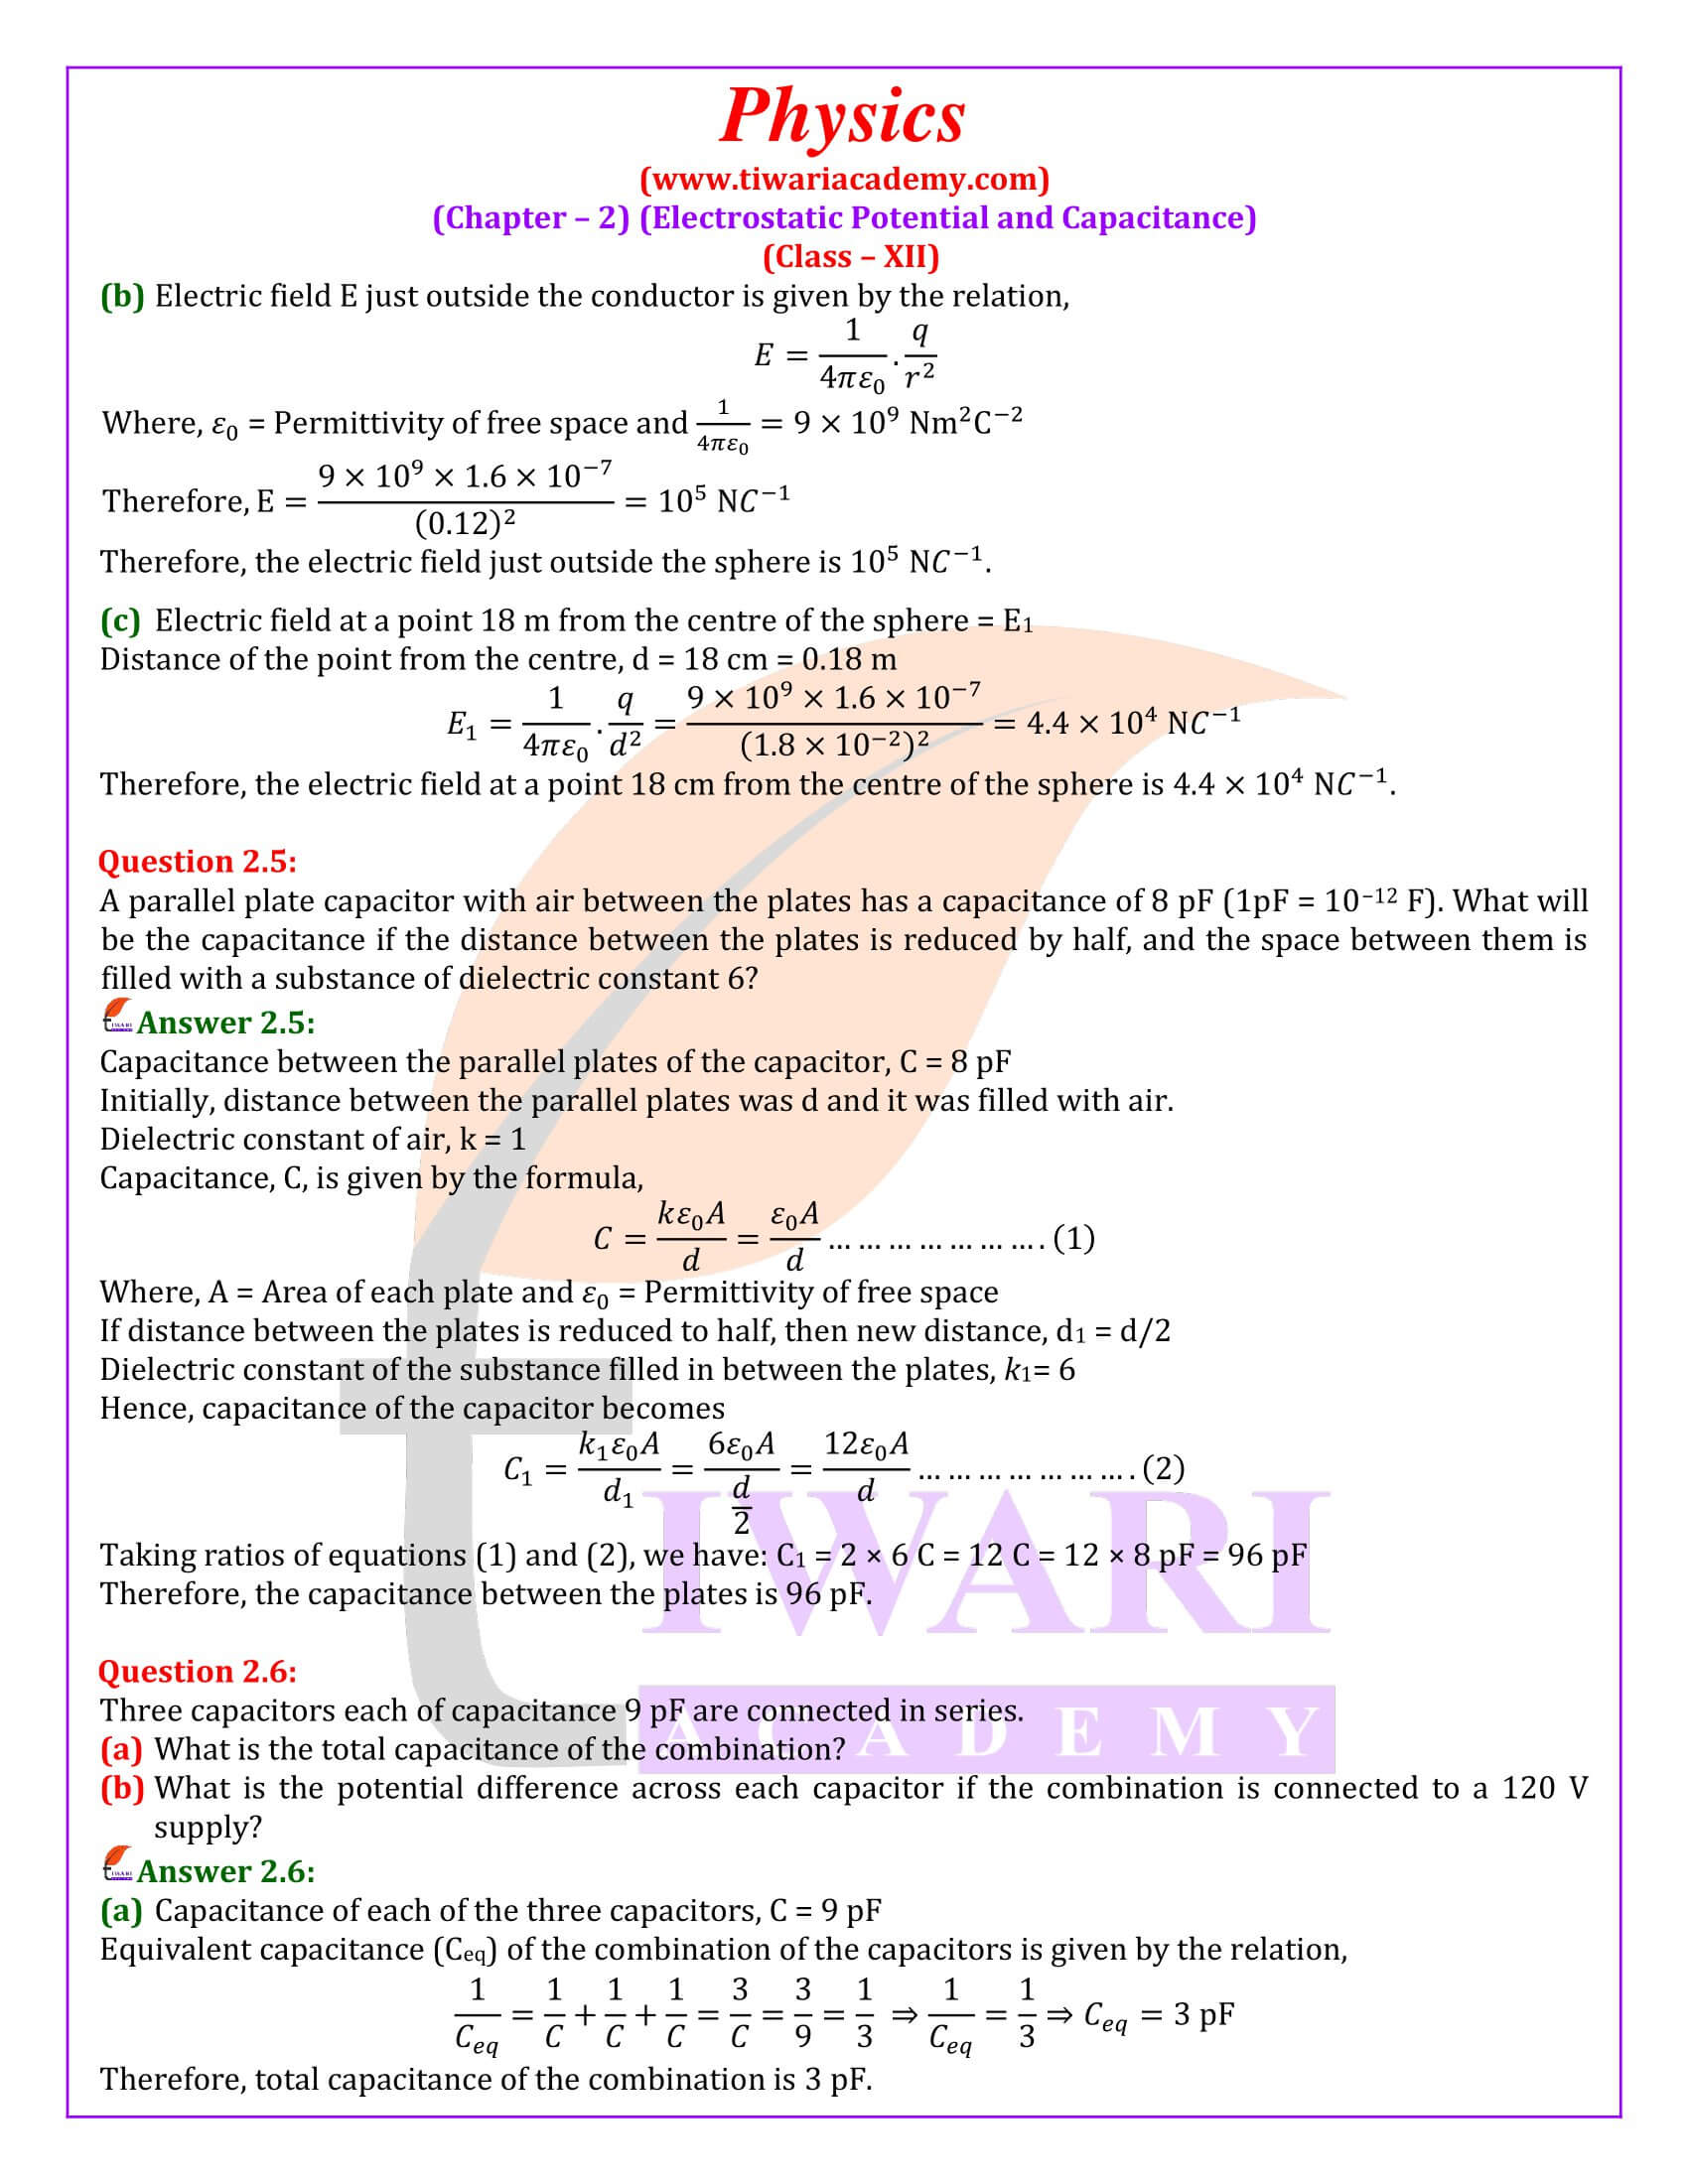 NCERT Solutions for Class 12 Physics Chapter 2 in English Medium